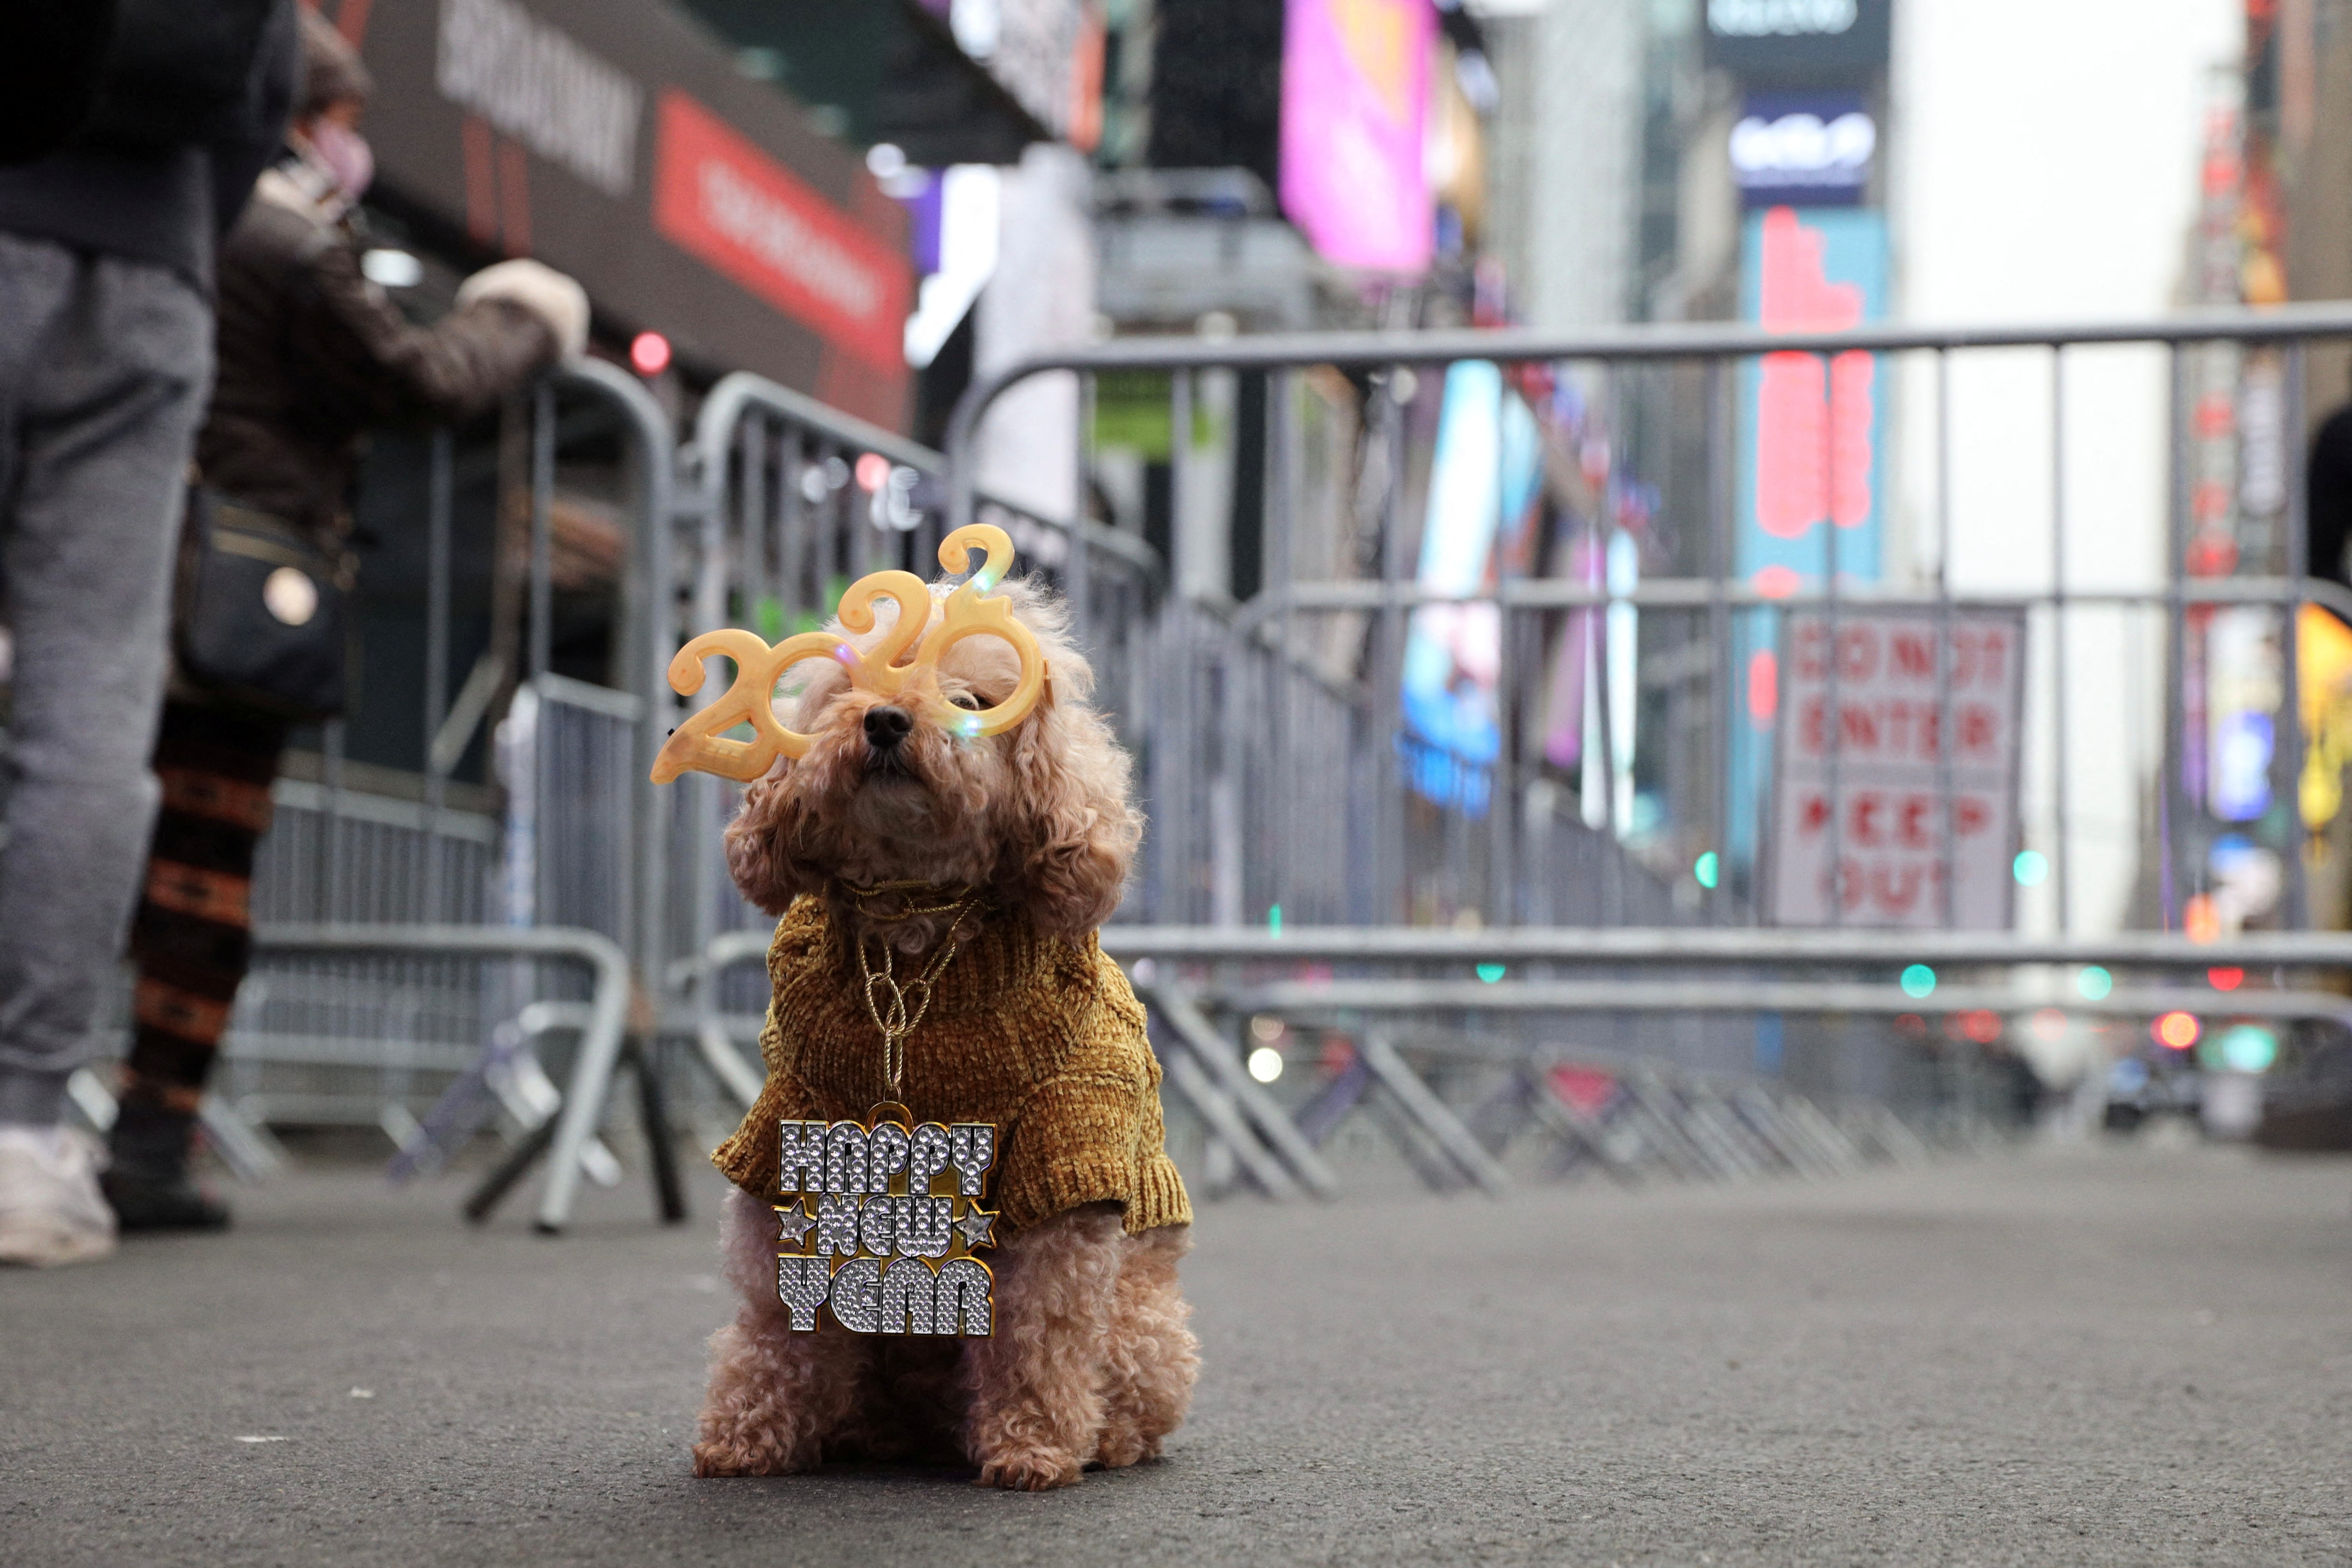 Teddy, a 12-year-old miniature poodle wearing 2022 glasses sits on West 47th Street ahead of New Year's Eve celebrations at Times Square as the Omicron variant continues to spread in the Manhattan borough of New York City, U.S., December 31, 2021. REUTERS/Stefan Jeremiah